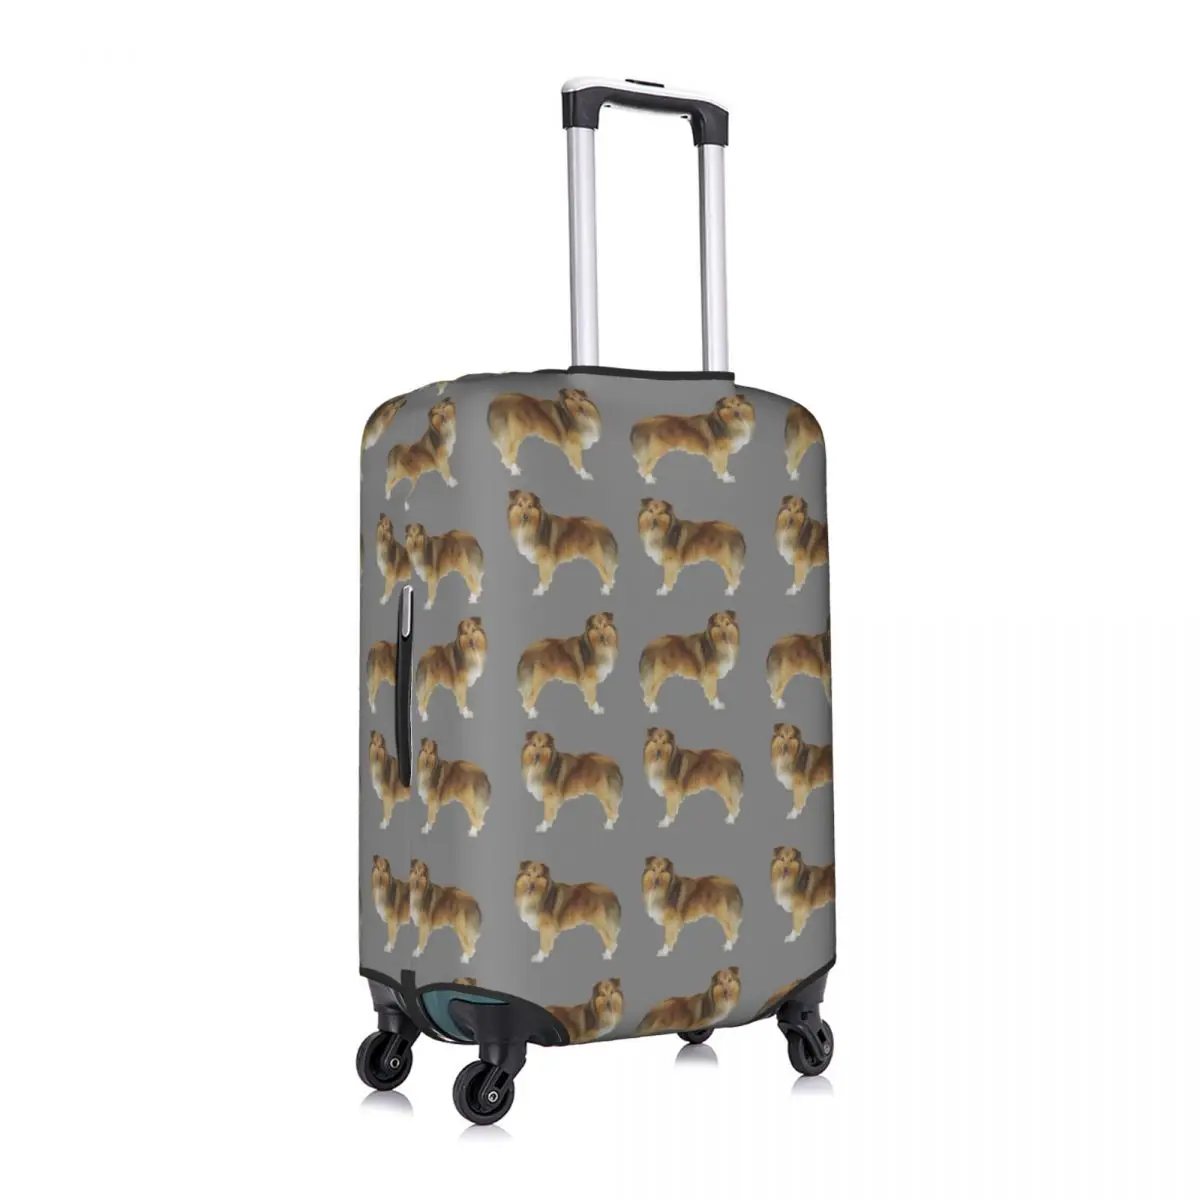 

Scotland Shepherd Dog Luggage Cover Spandex Suitcase Protector Fits 19-21 Inch